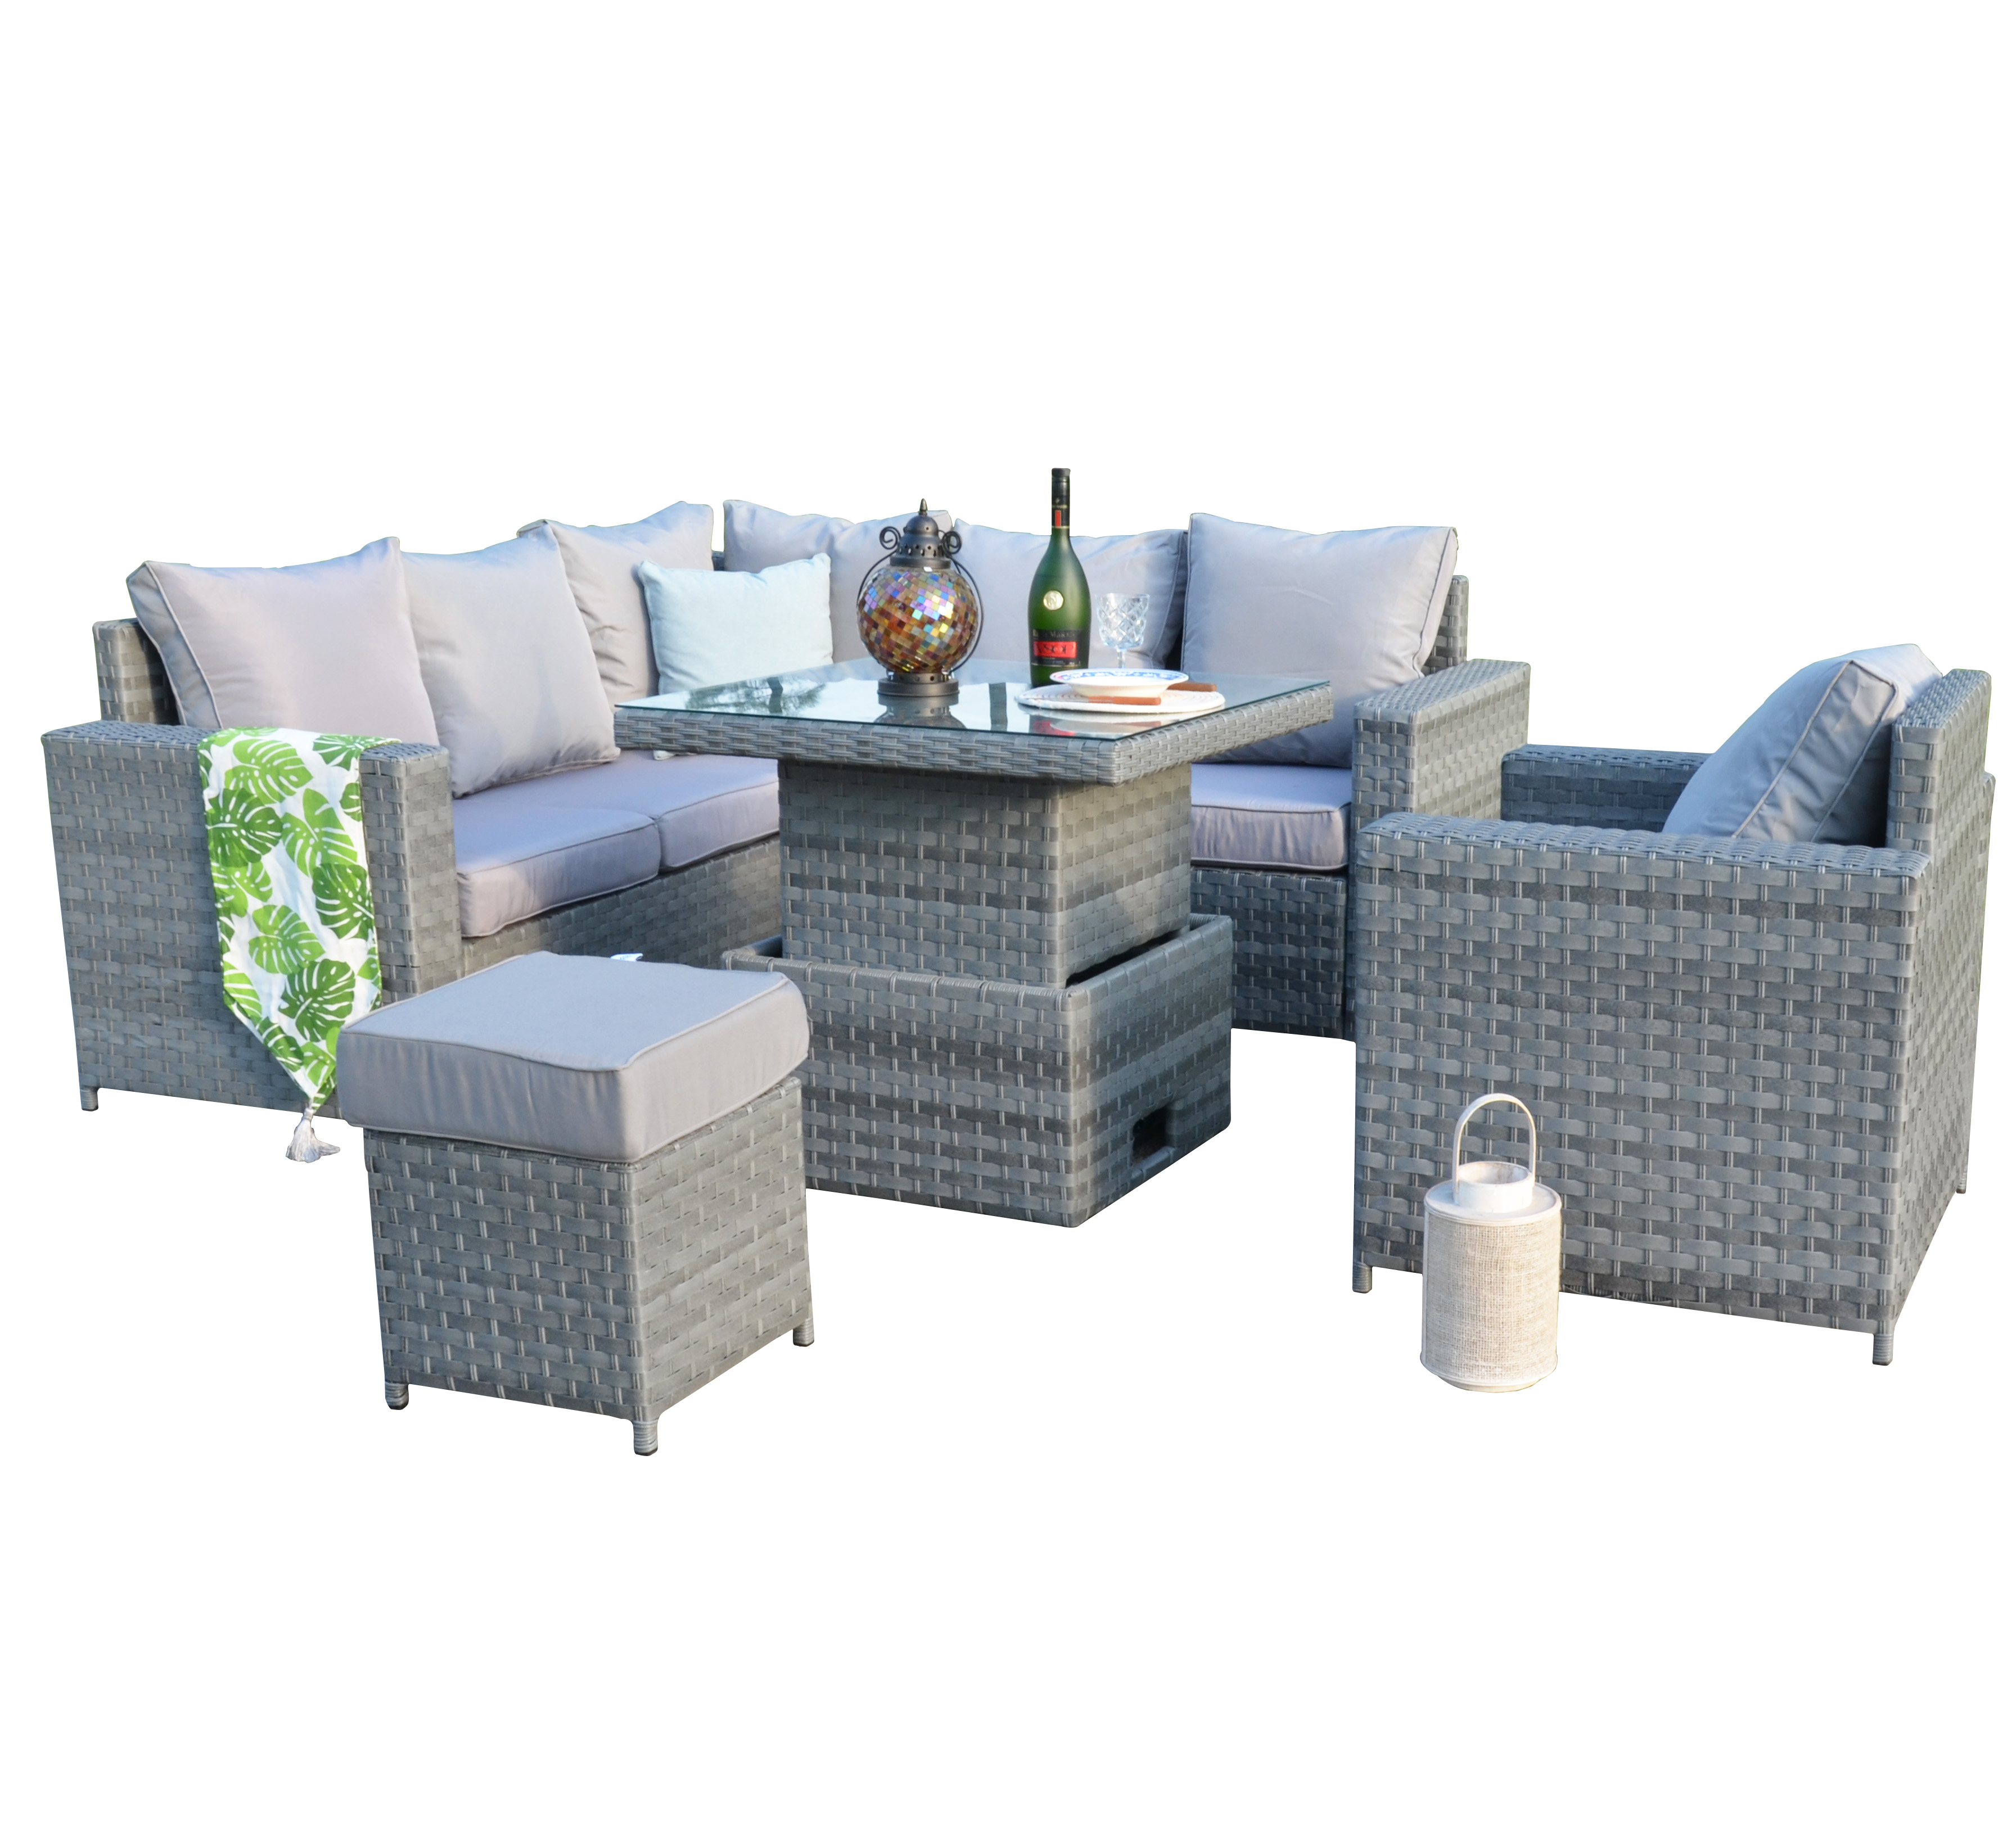 Aster Range High Back Small Dining Corner Sofa Set with Arm Chair in Grey Weave